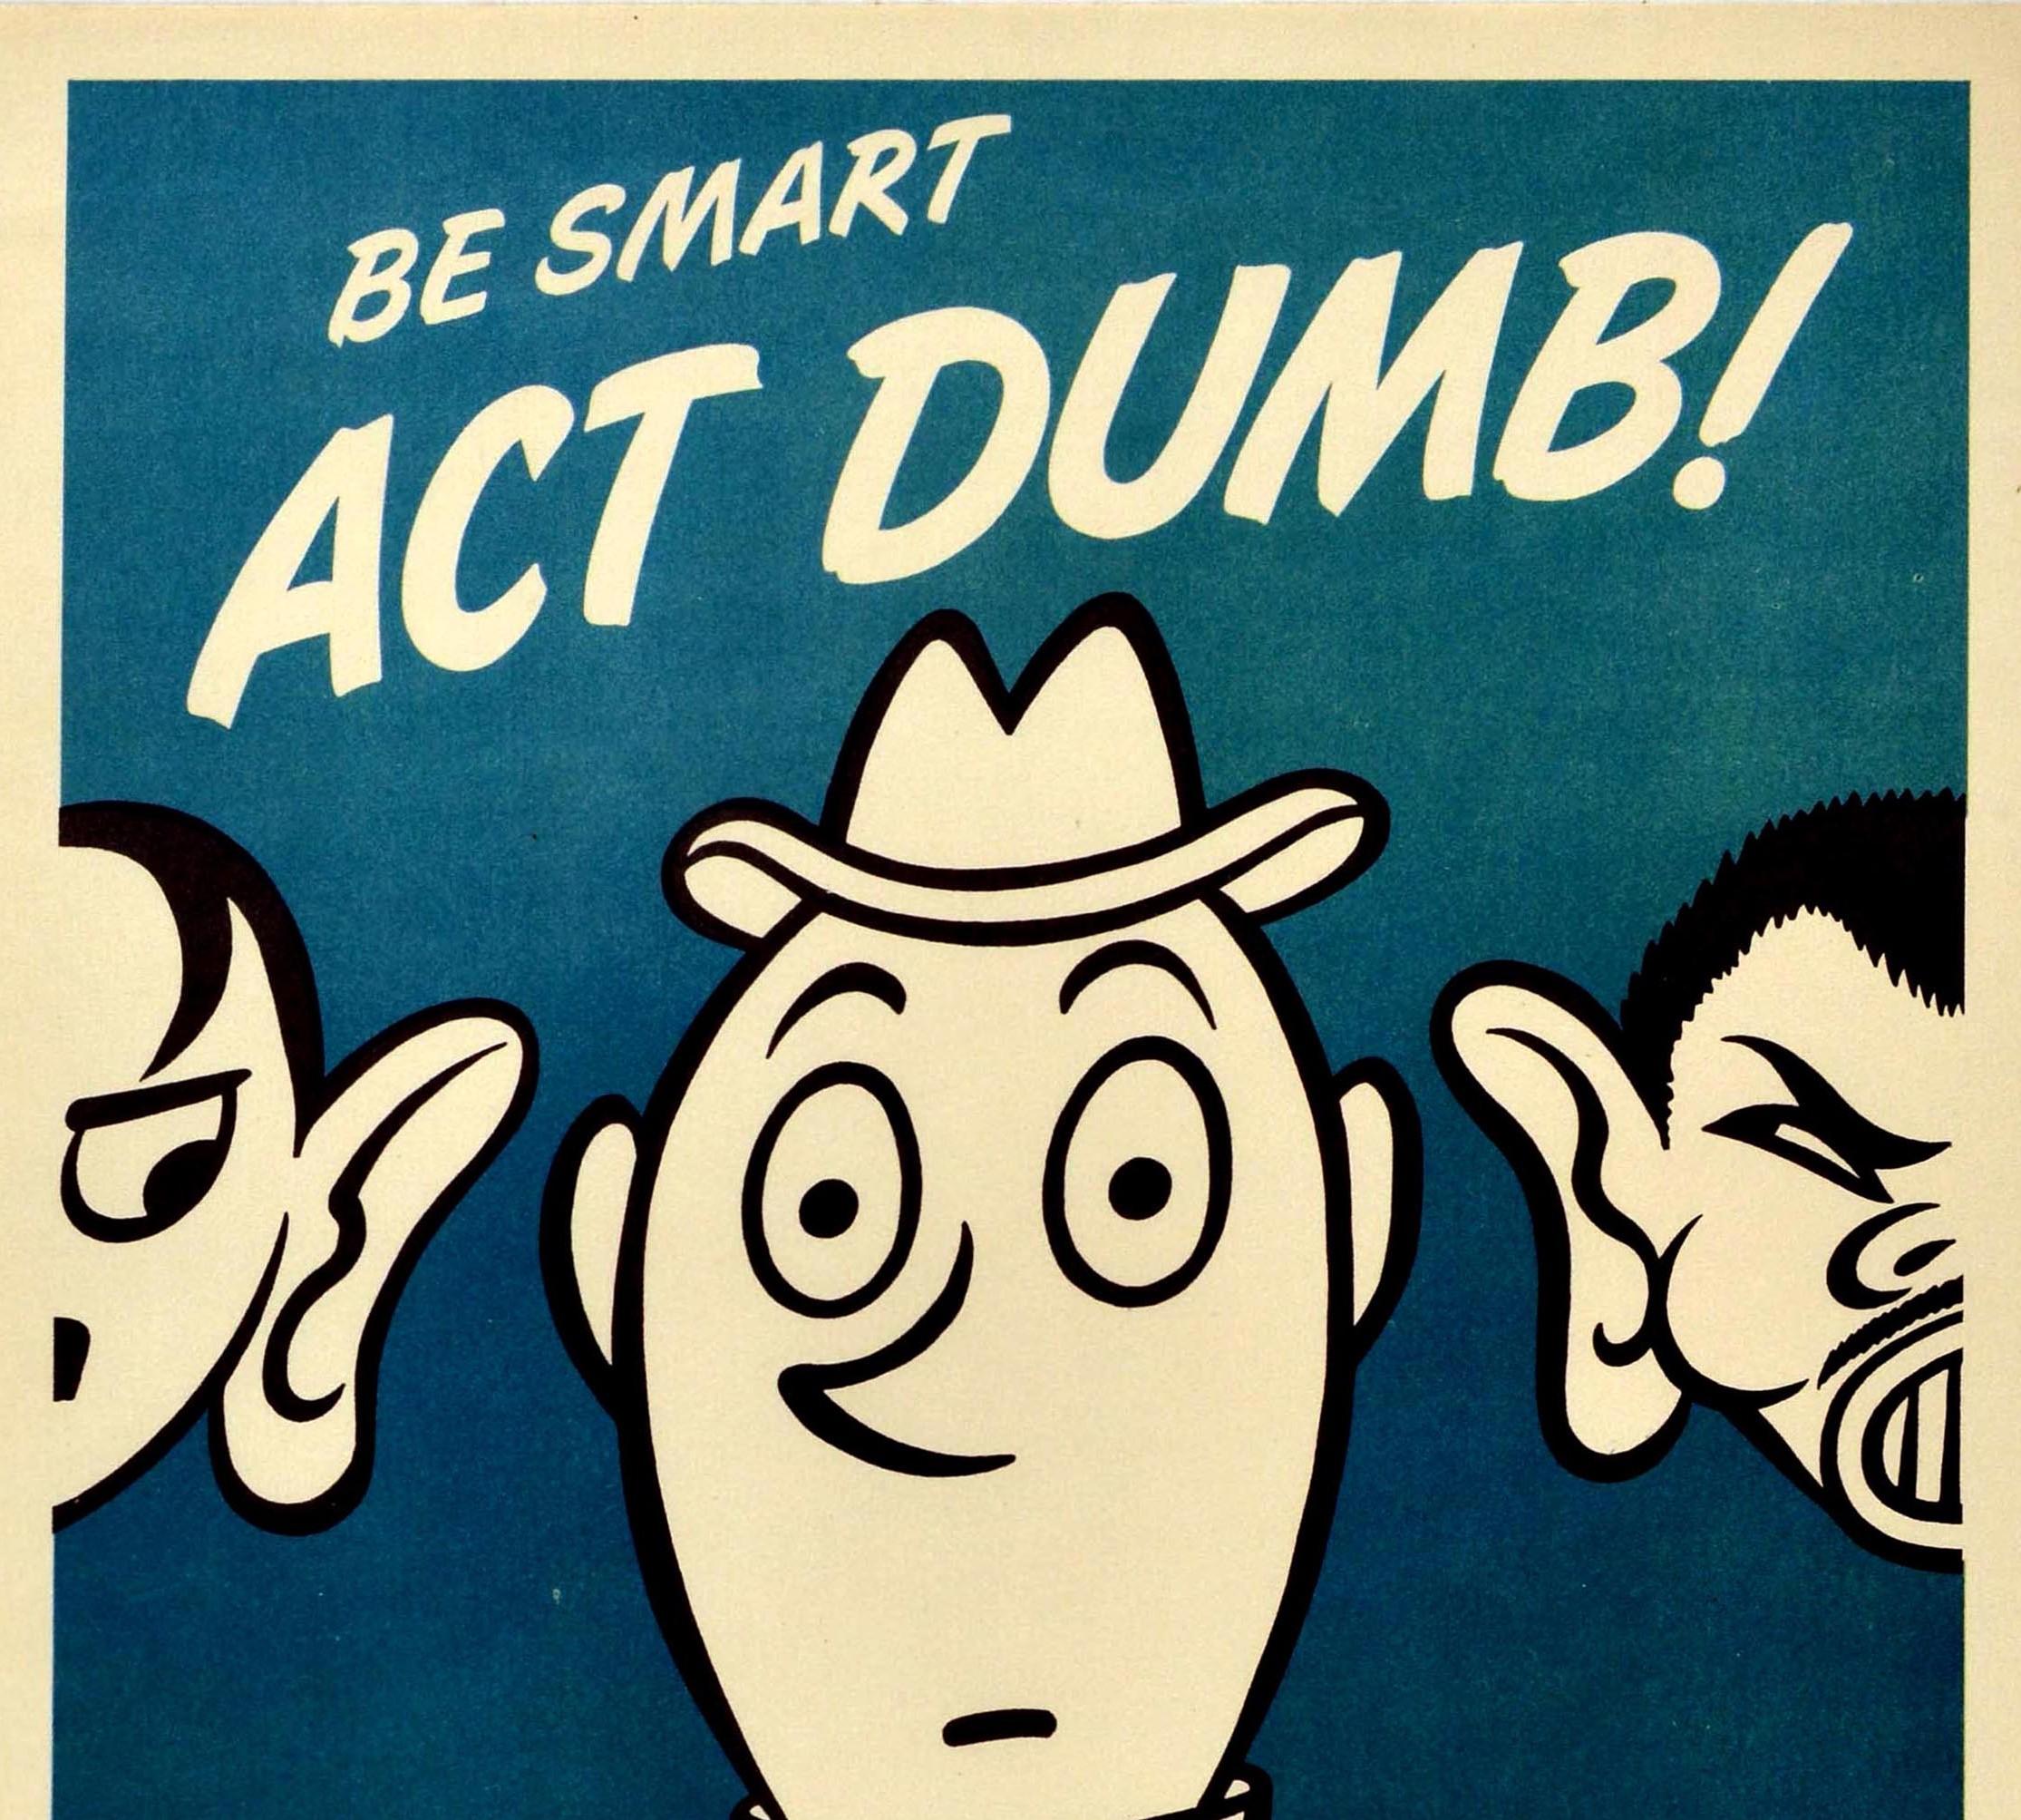 Original Vintage Poster Be Smart Act Dumb Loose Talk Can Cost Lives WWII Defense - Print by O. Soglow